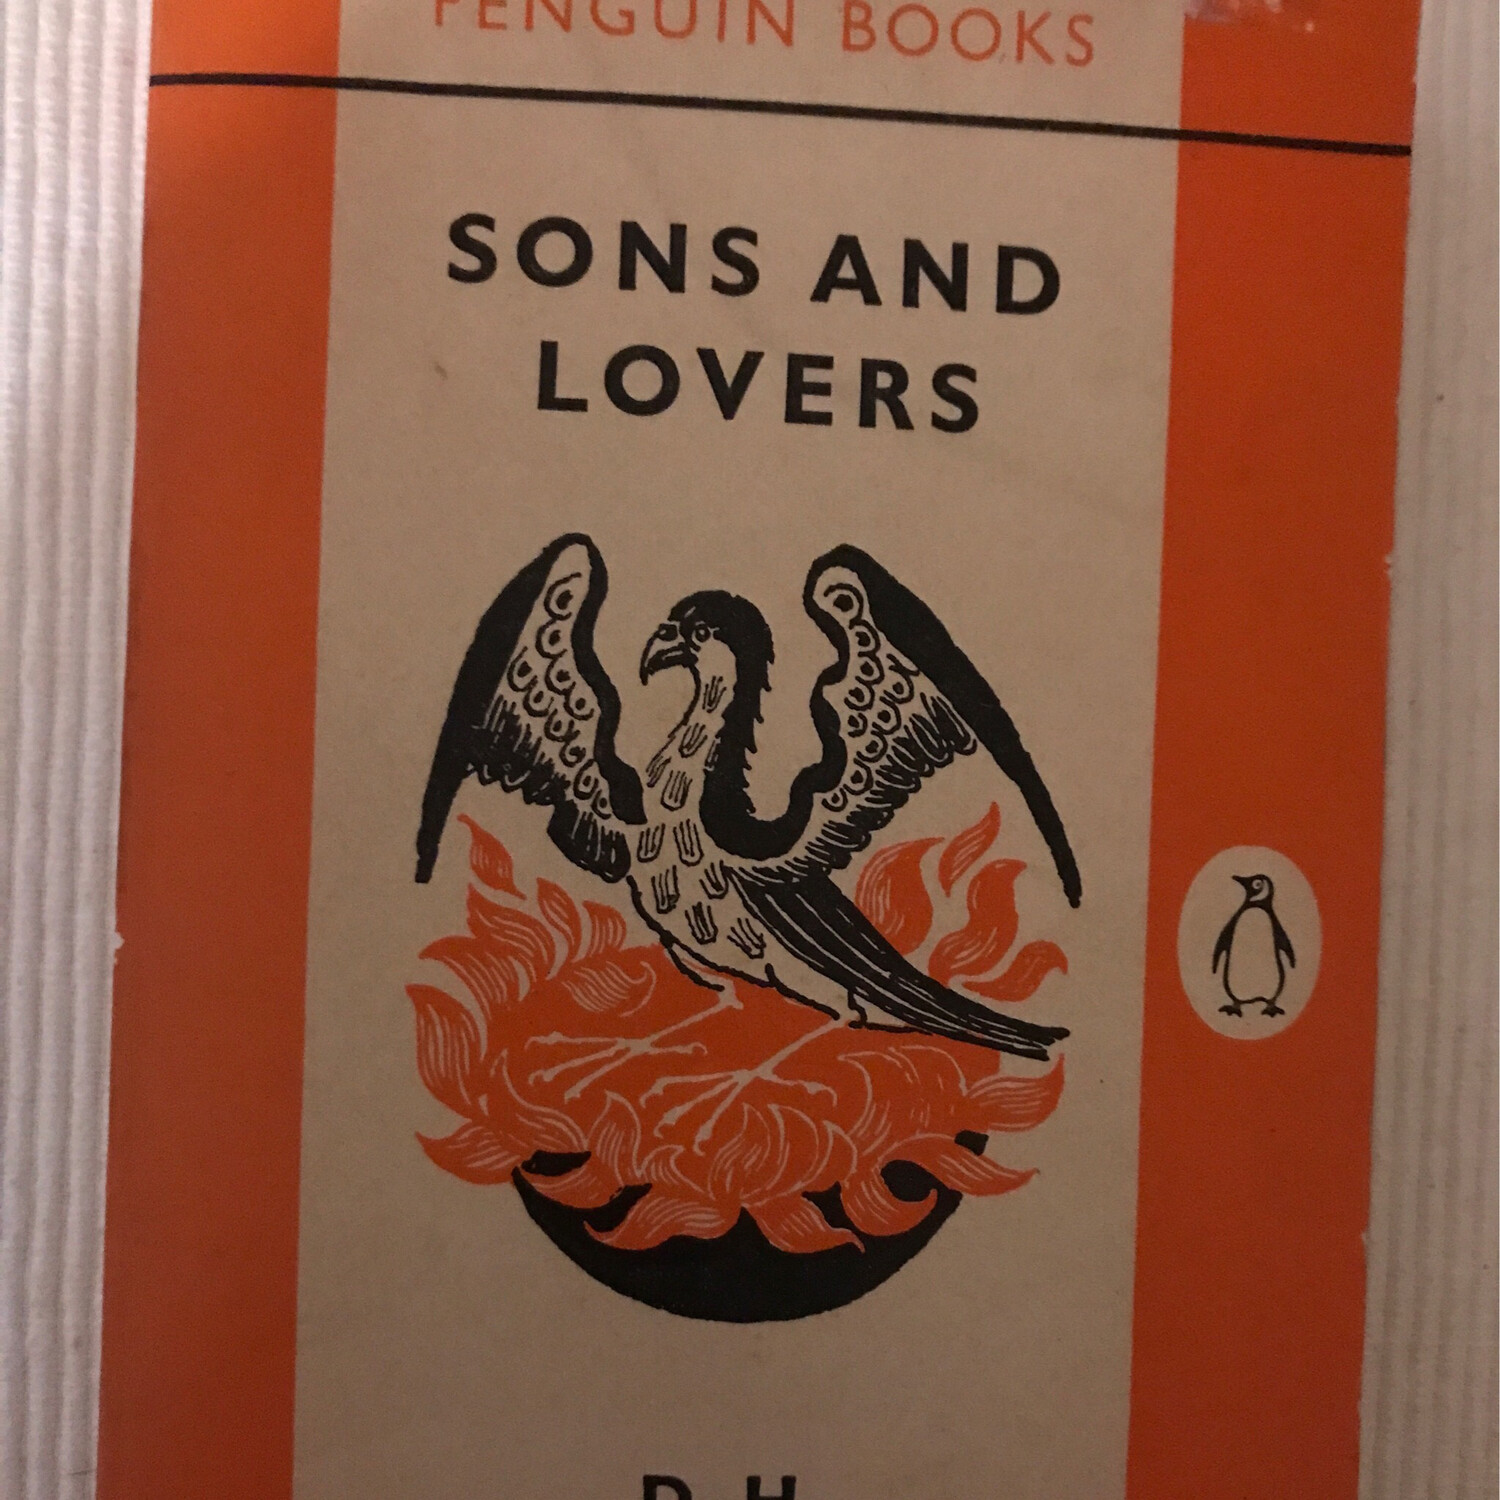 Sons And Lovers, D. H. Lawrence